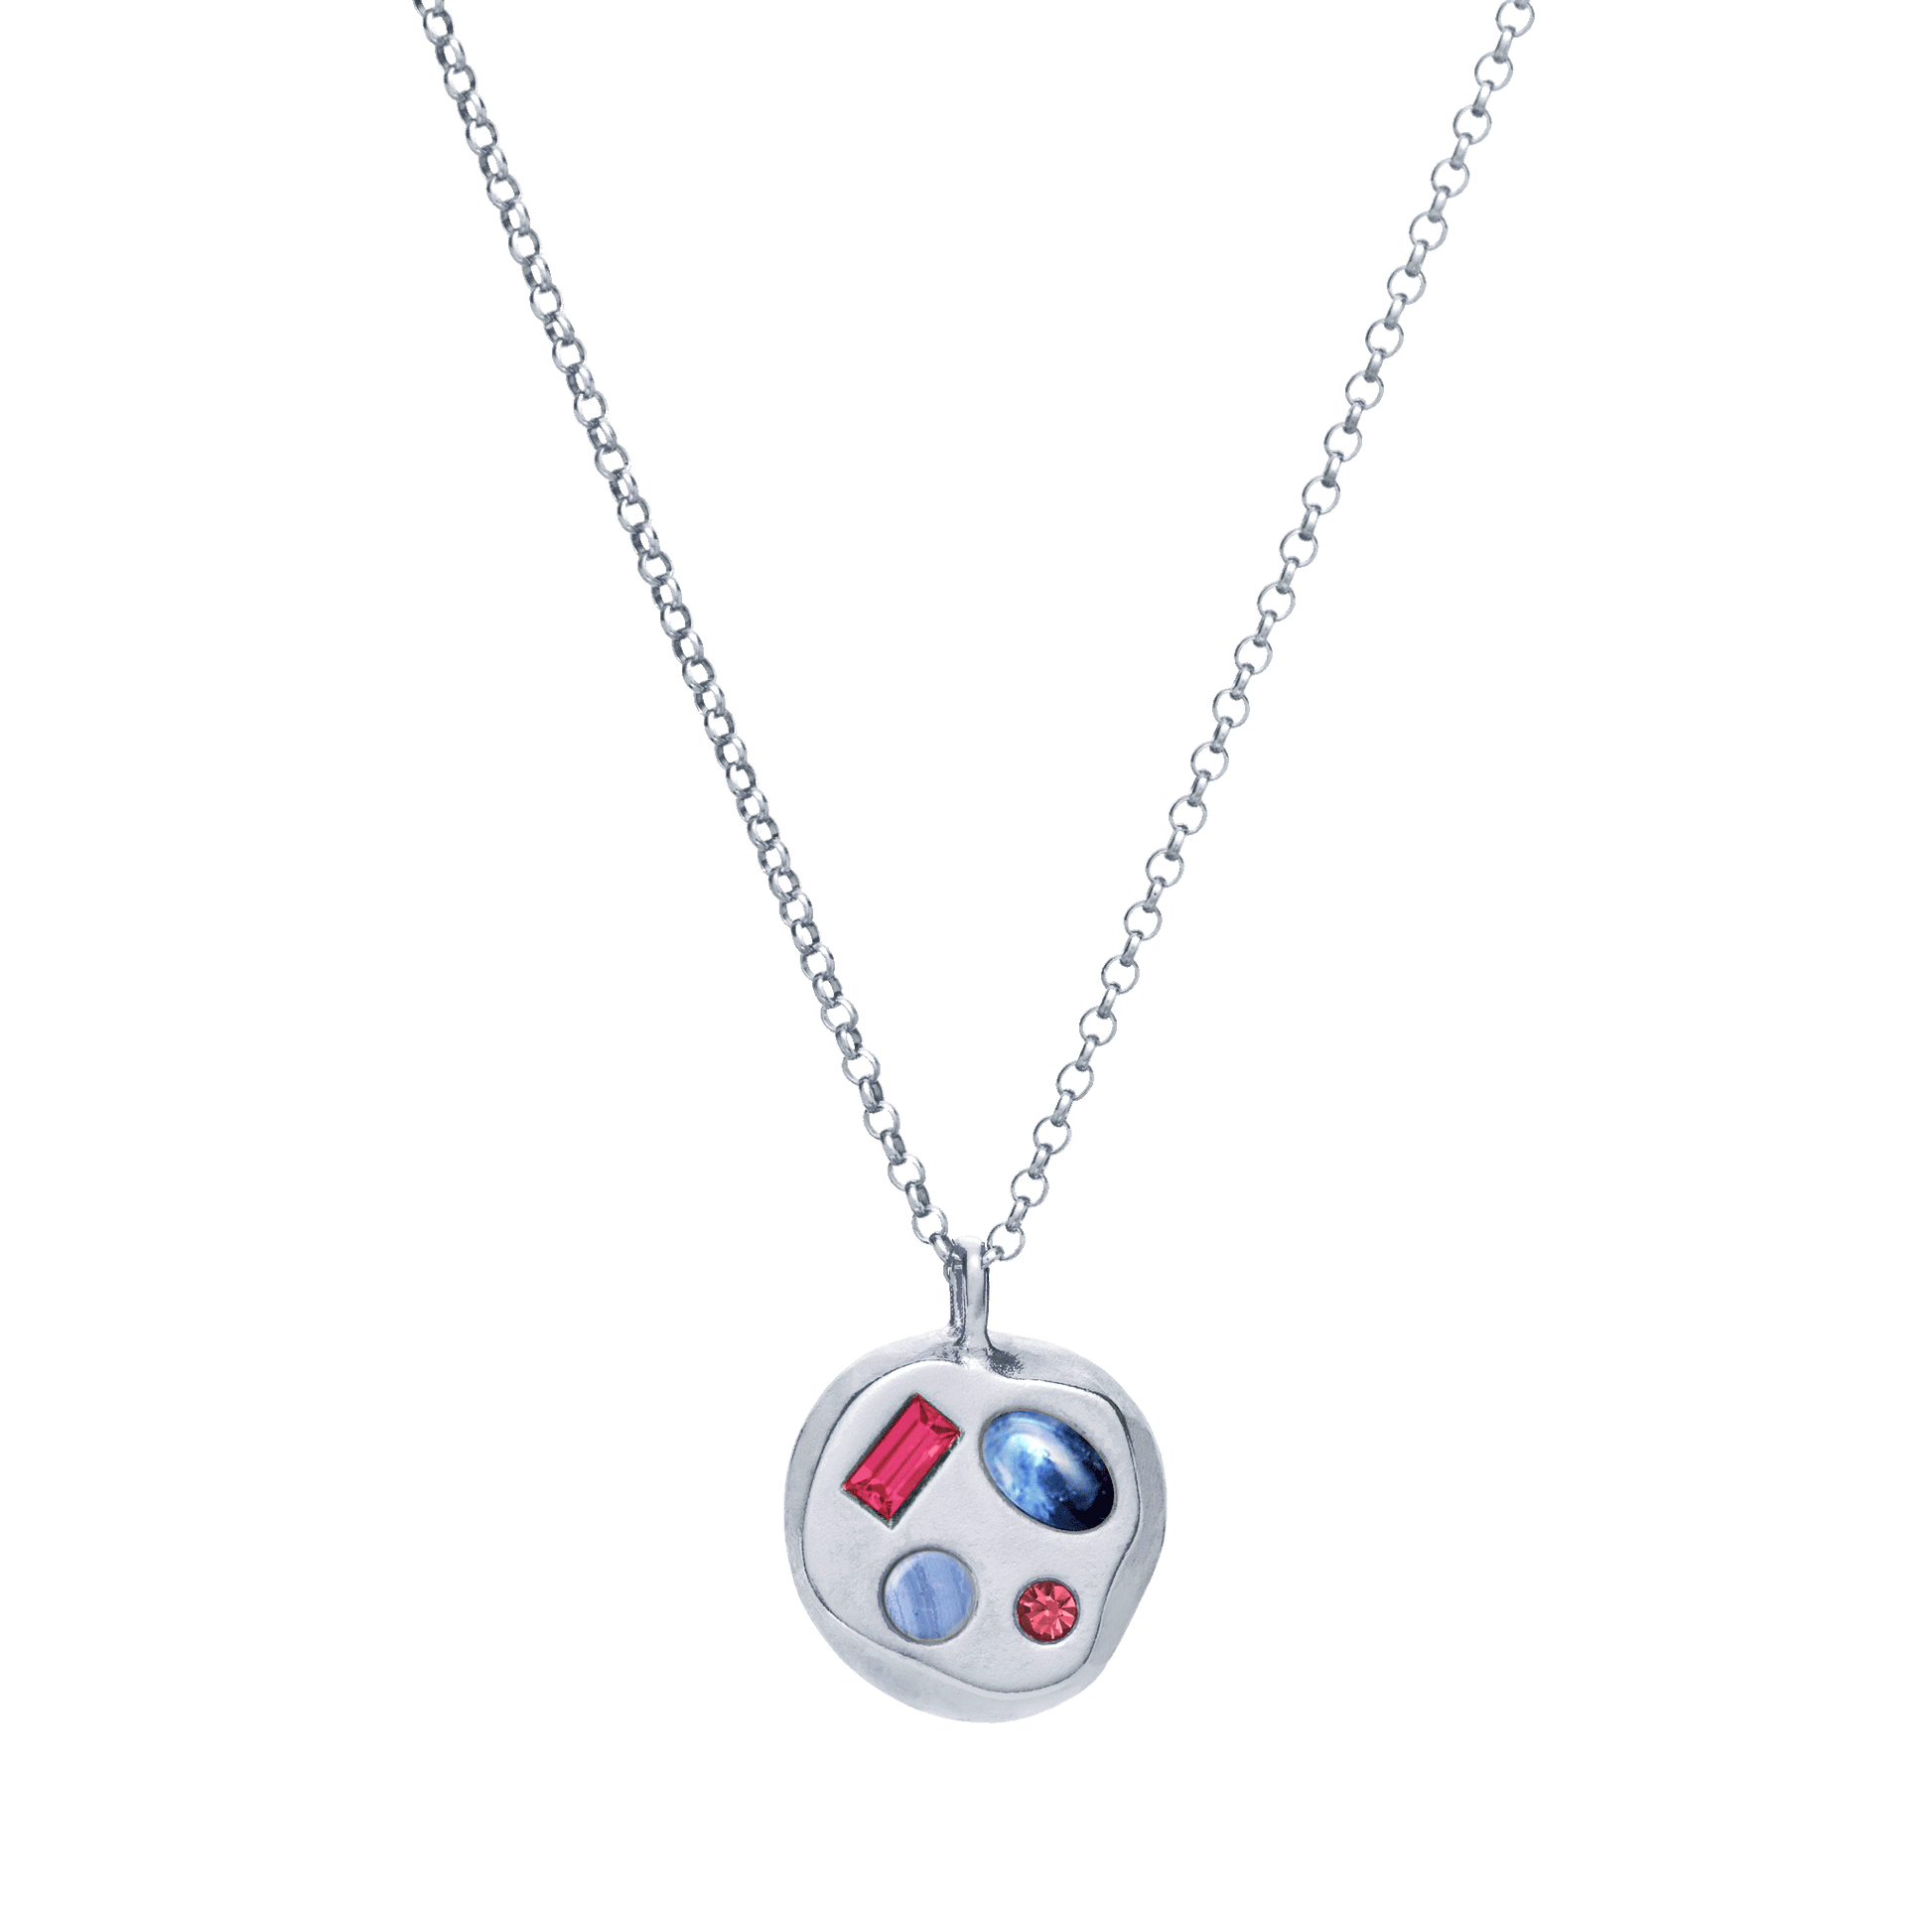 The July Ninth Pendant in Sterling Silver